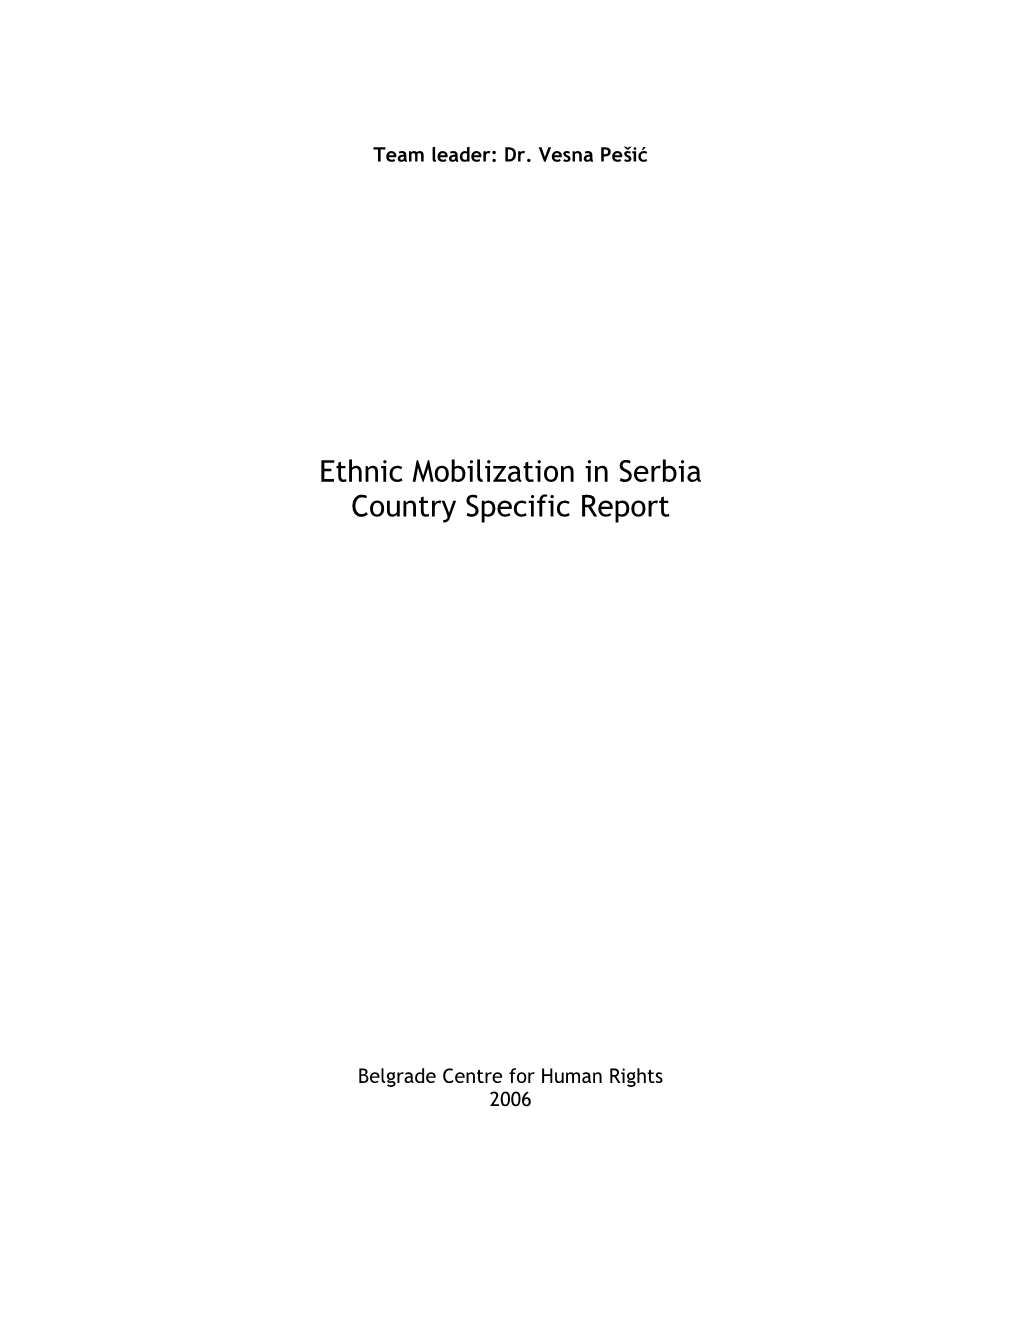 Ethnic Mobilization in Serbia Country Specific Report